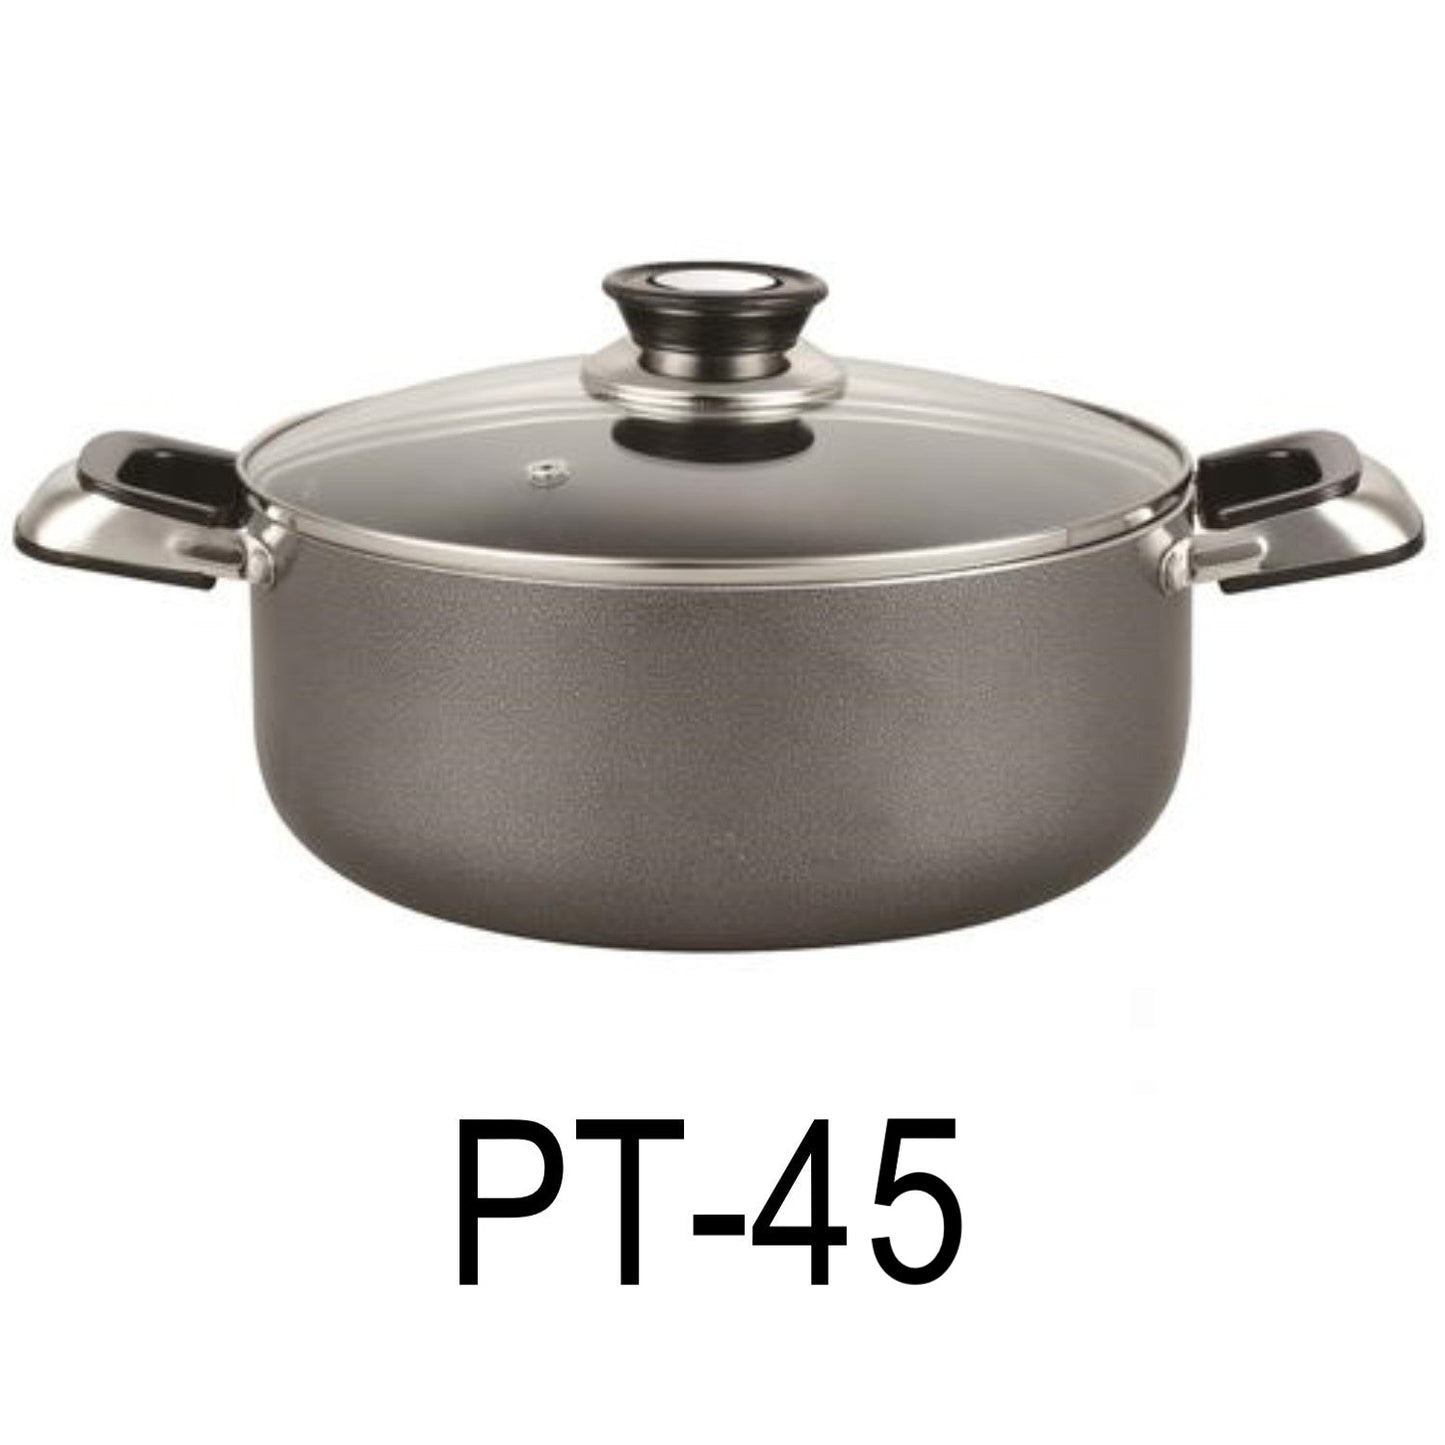 45 QT Non-stick Stockpot with Glass Lid